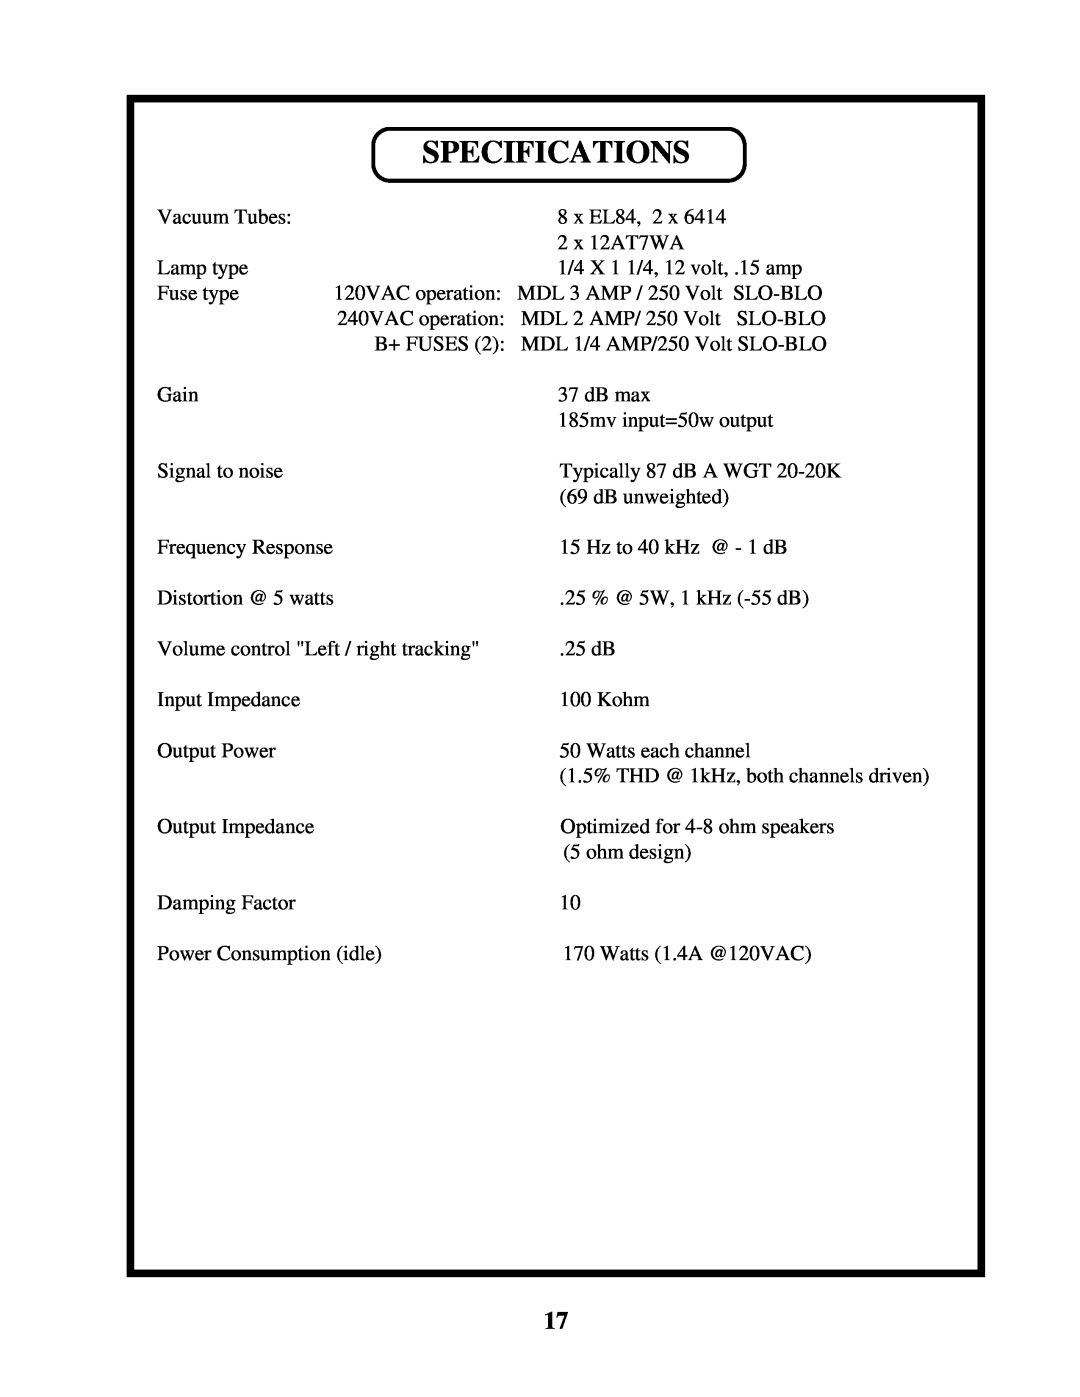 Manley Labs INTEGRATED AMPLIFIER owner manual Specifications 